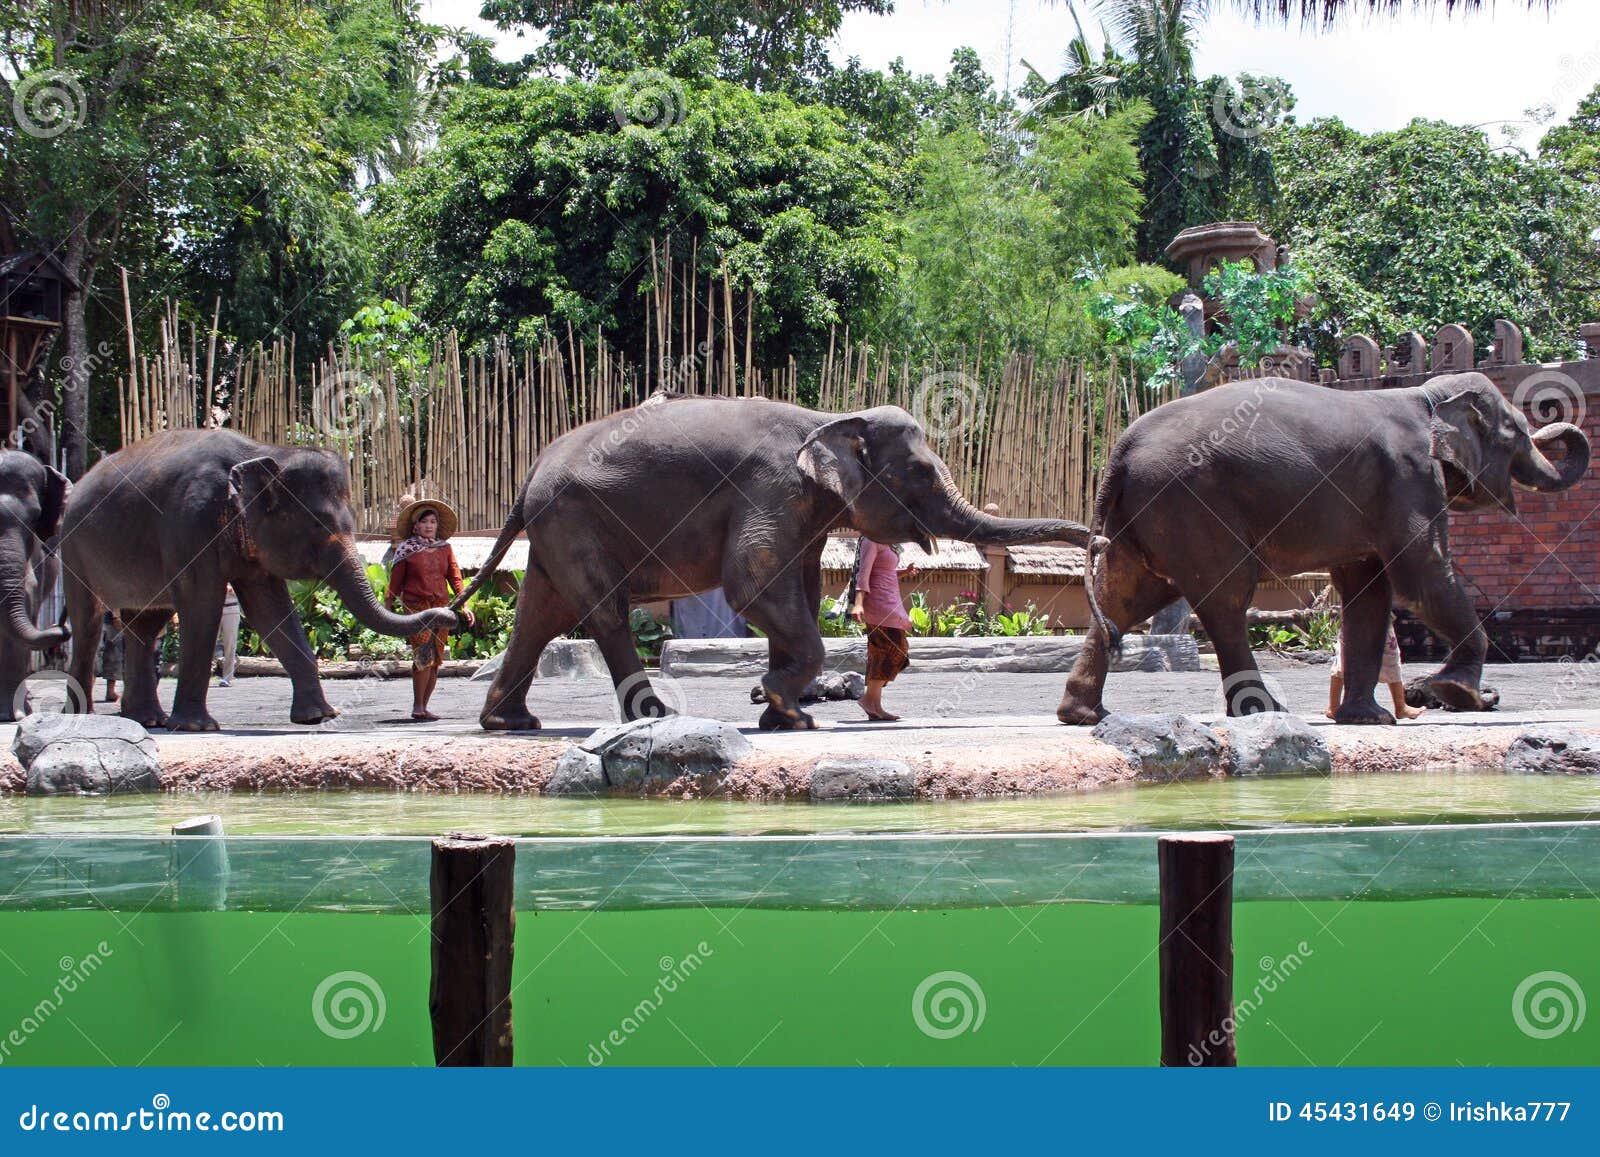 Elephant Show in Bali, Indonesia Editorial Stock Image - Image of